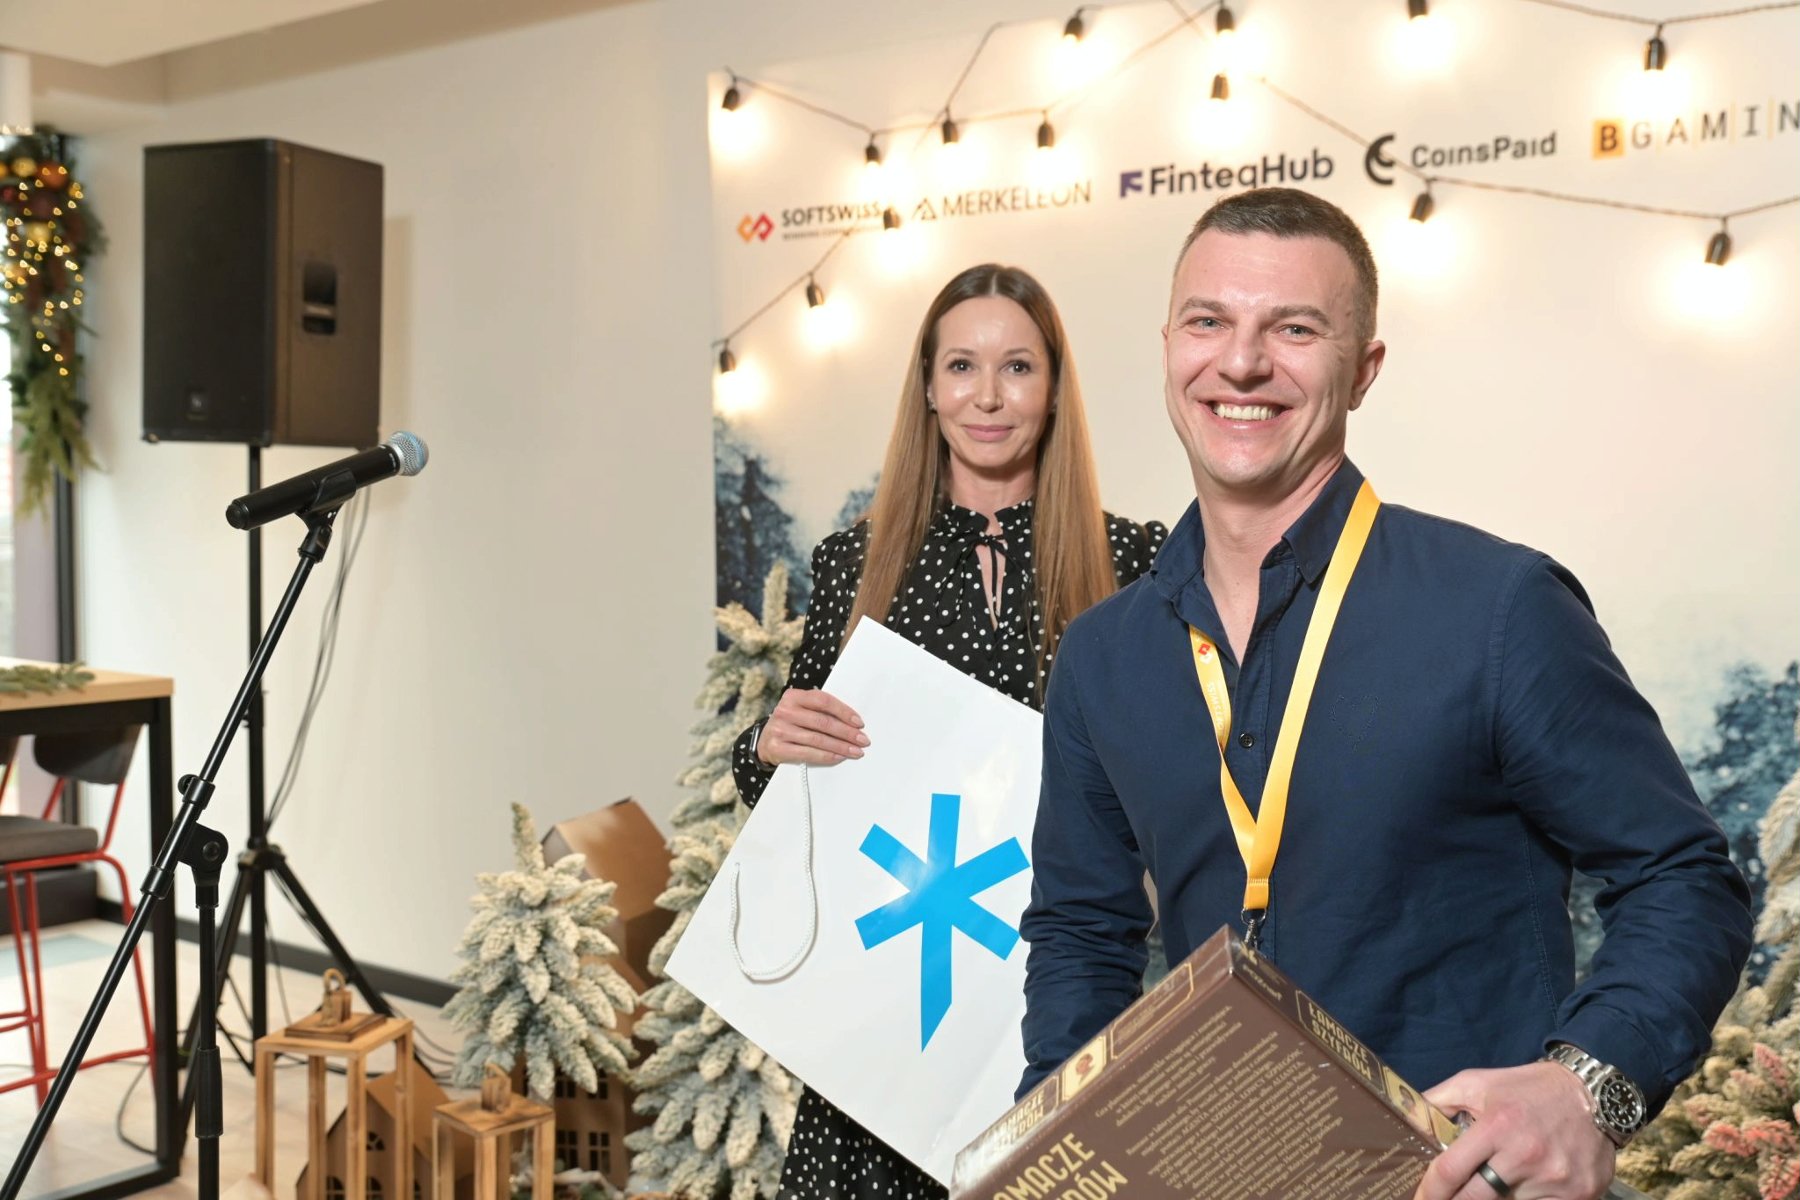 The photo shows Ivan Montik, founder of SOFTSWISS. The man is smiling, holding the board game Code Breakers. Behind him is the director of the Investor Relations Department, Katja Lozina. In the background is a festive wall with company logos. - grafika artykułu